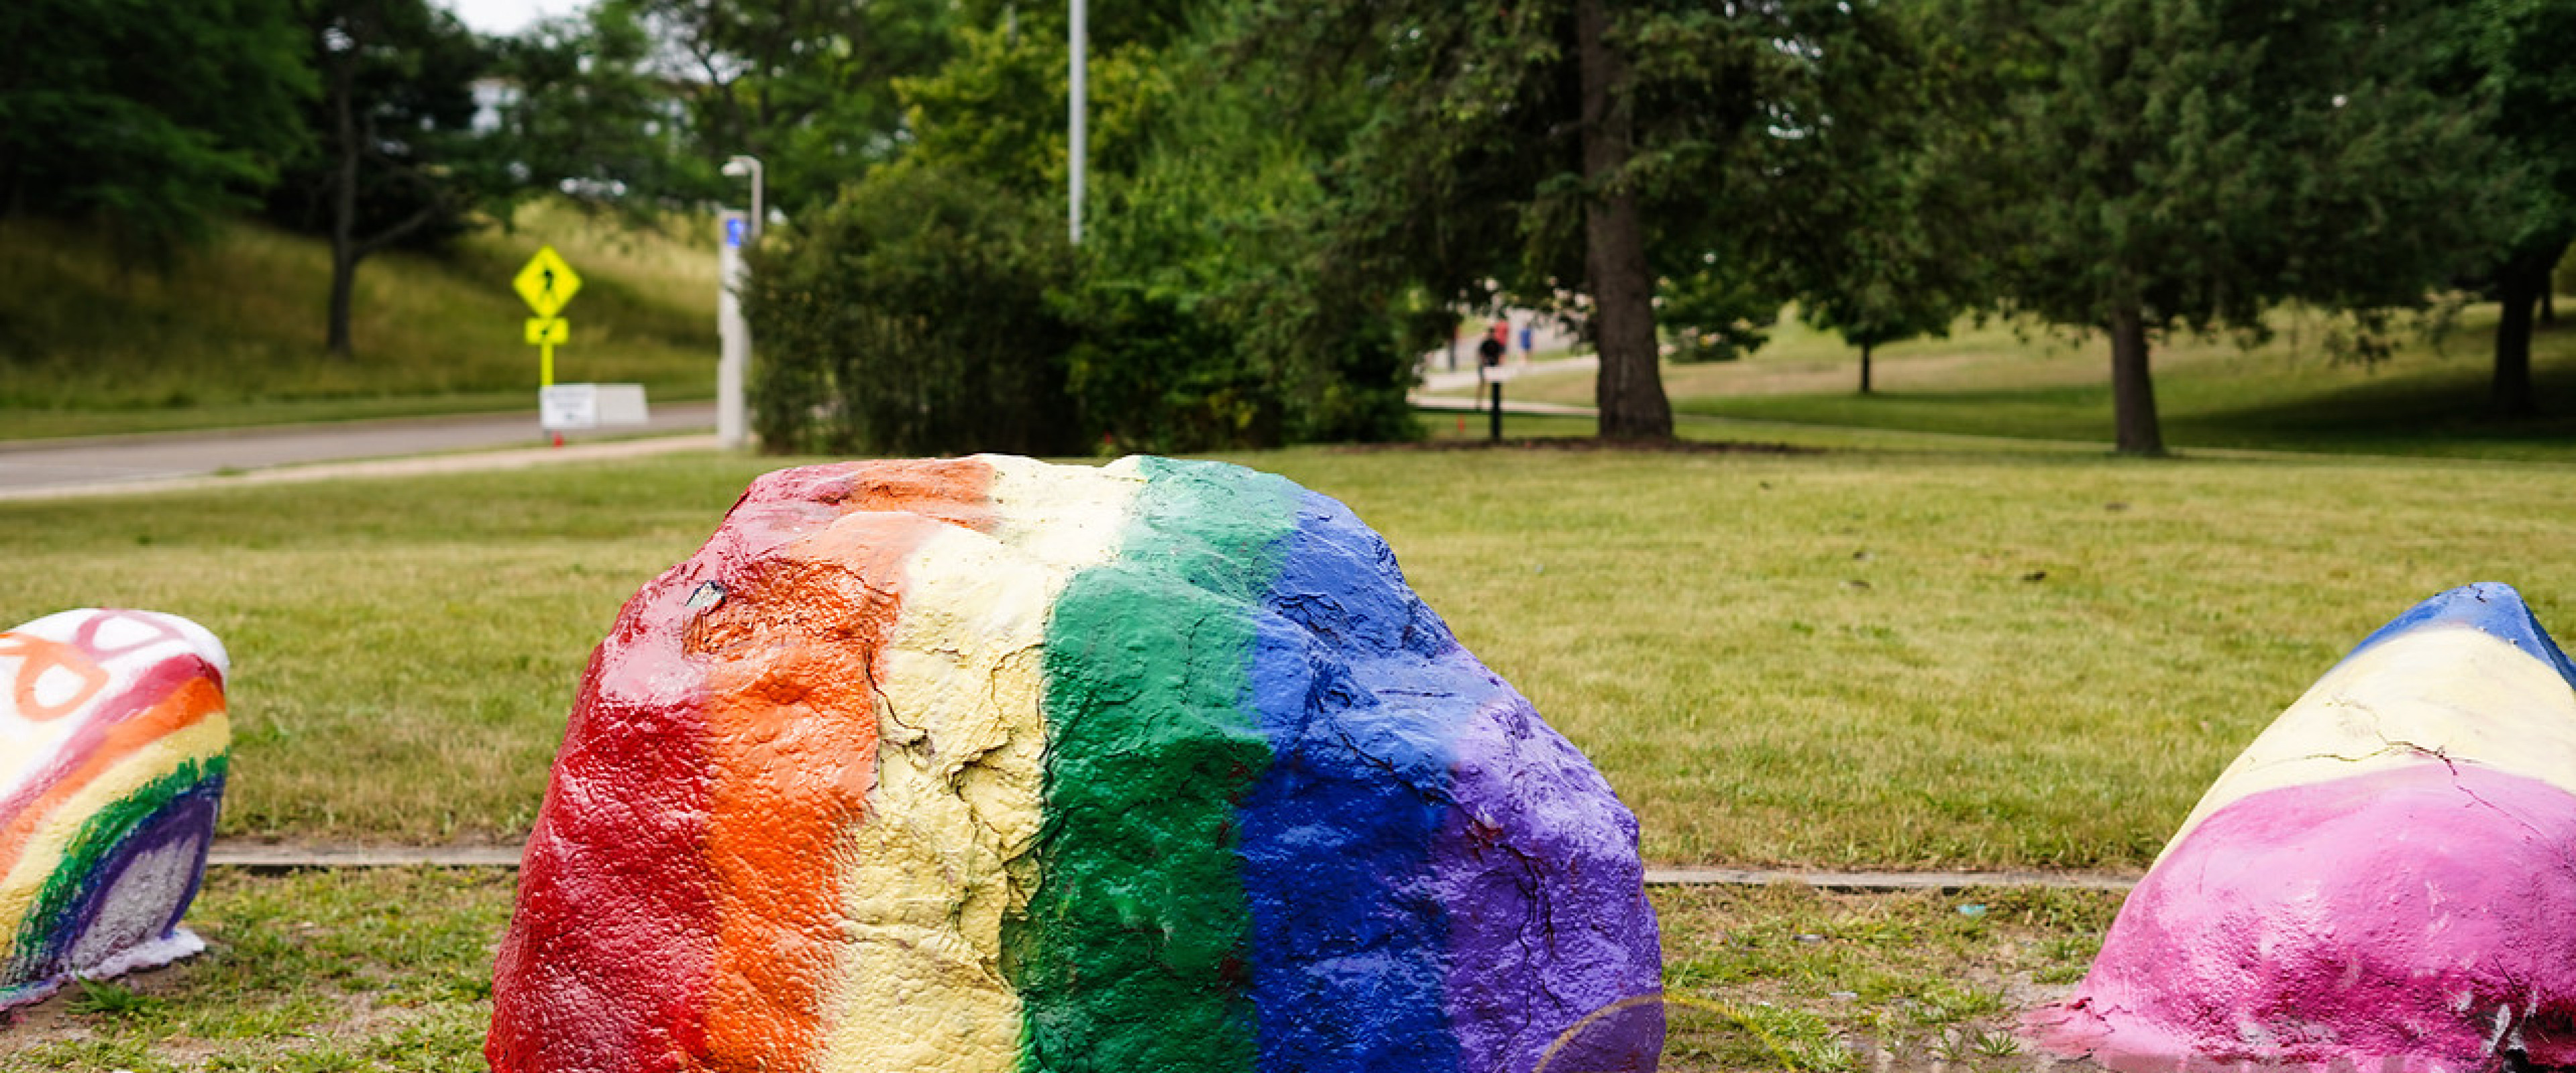 Rocks by Goldsworth Valley Pond painted various pride flag colors.